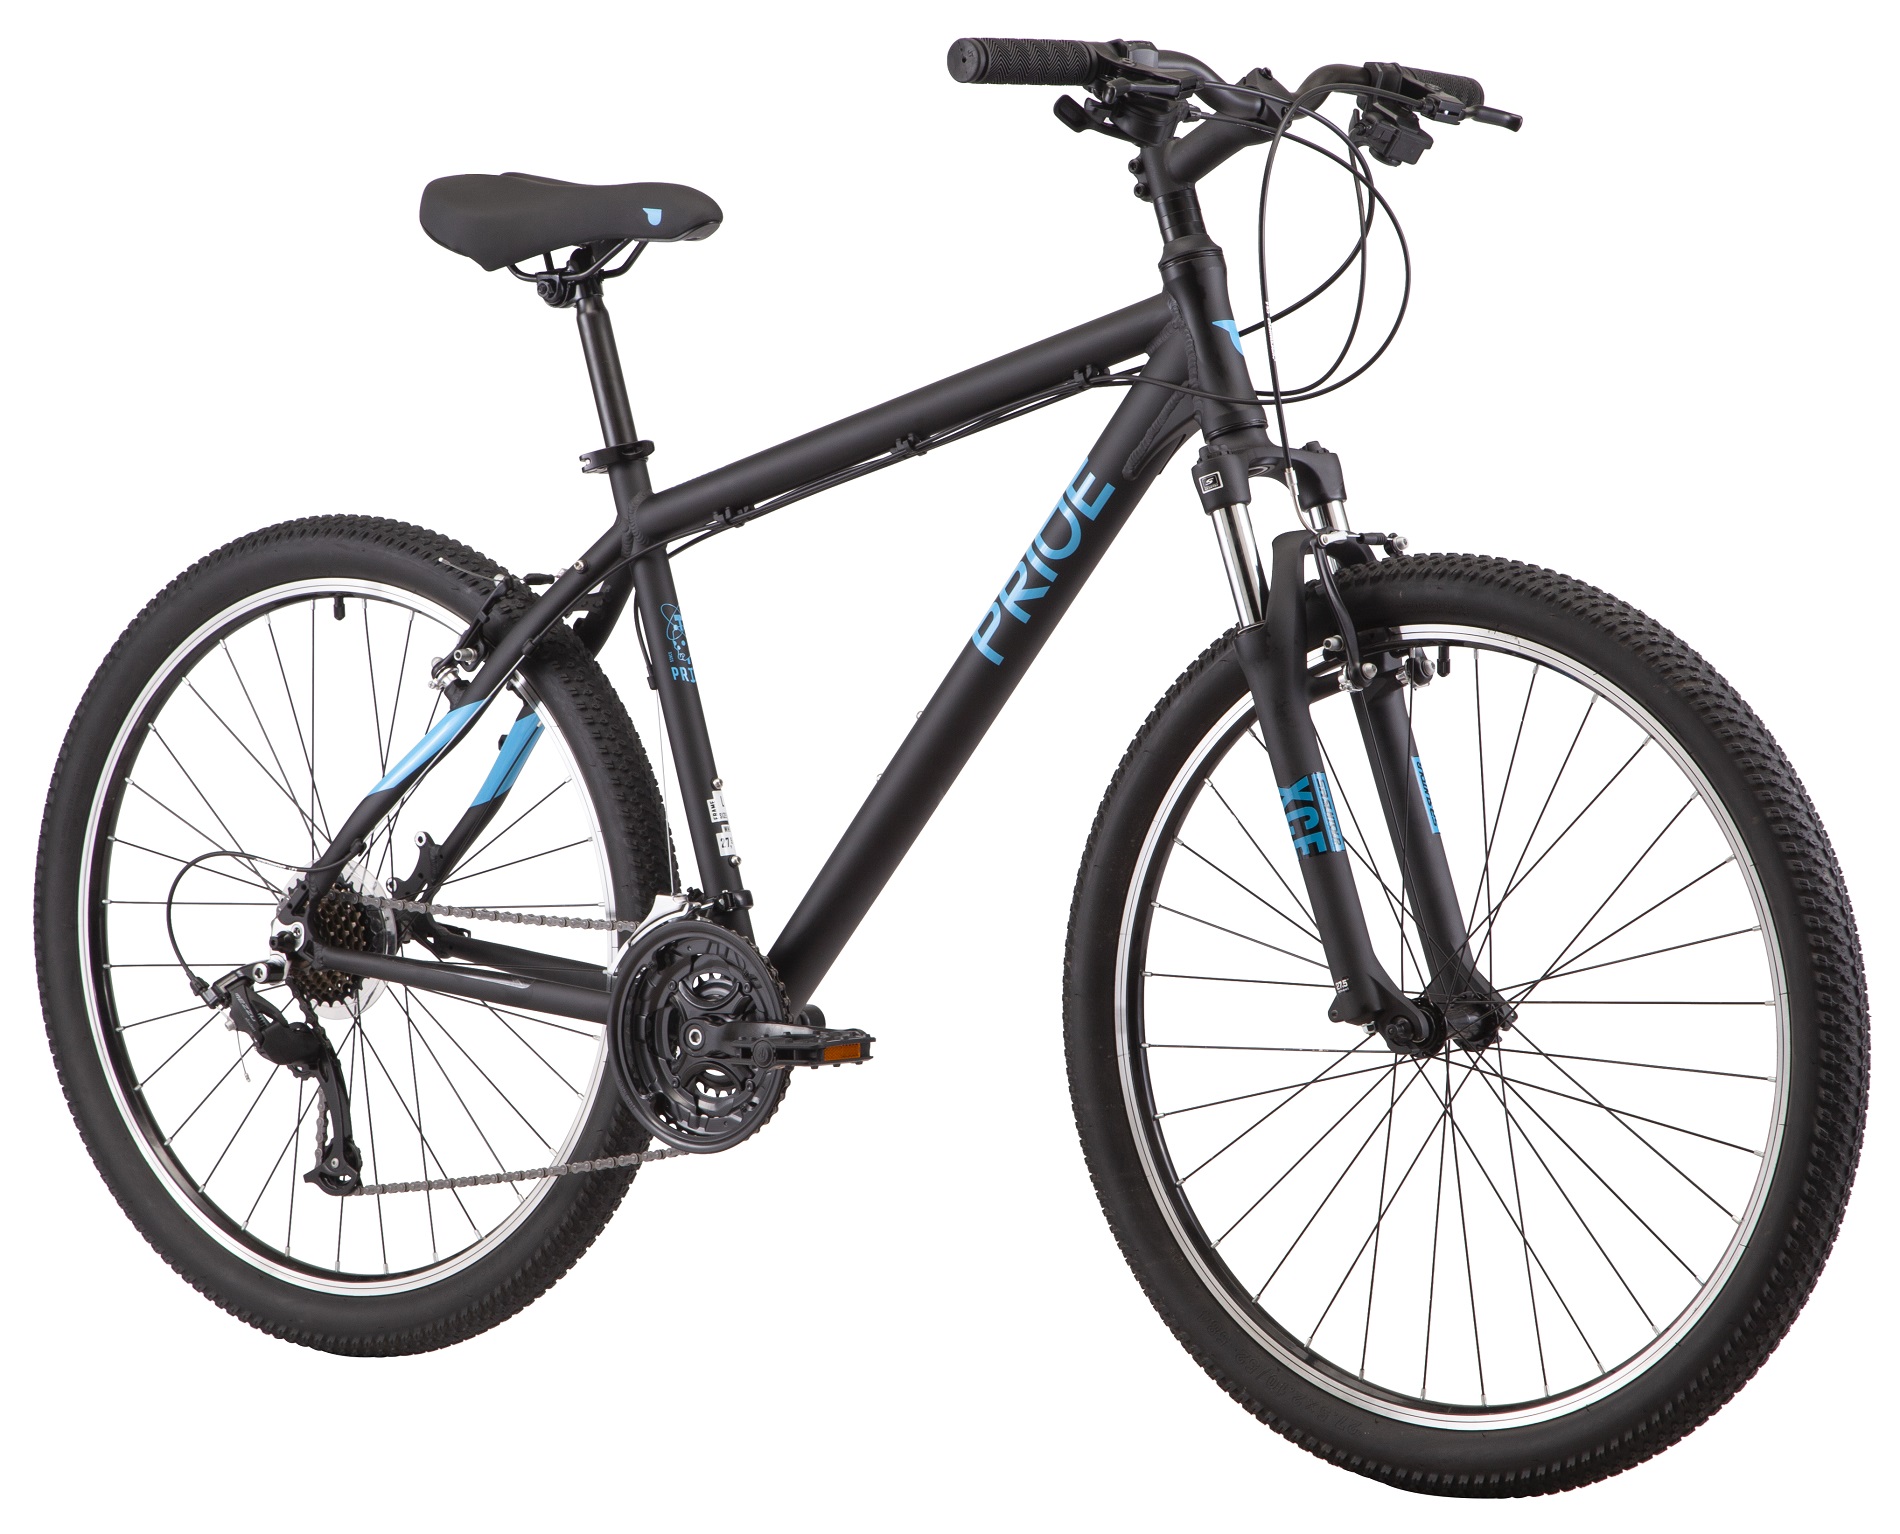 27.5" PRIDE MARVEL 7.1 frame - M 2022 Black (rear and front switches and tamnet - Microshift) Photo 2